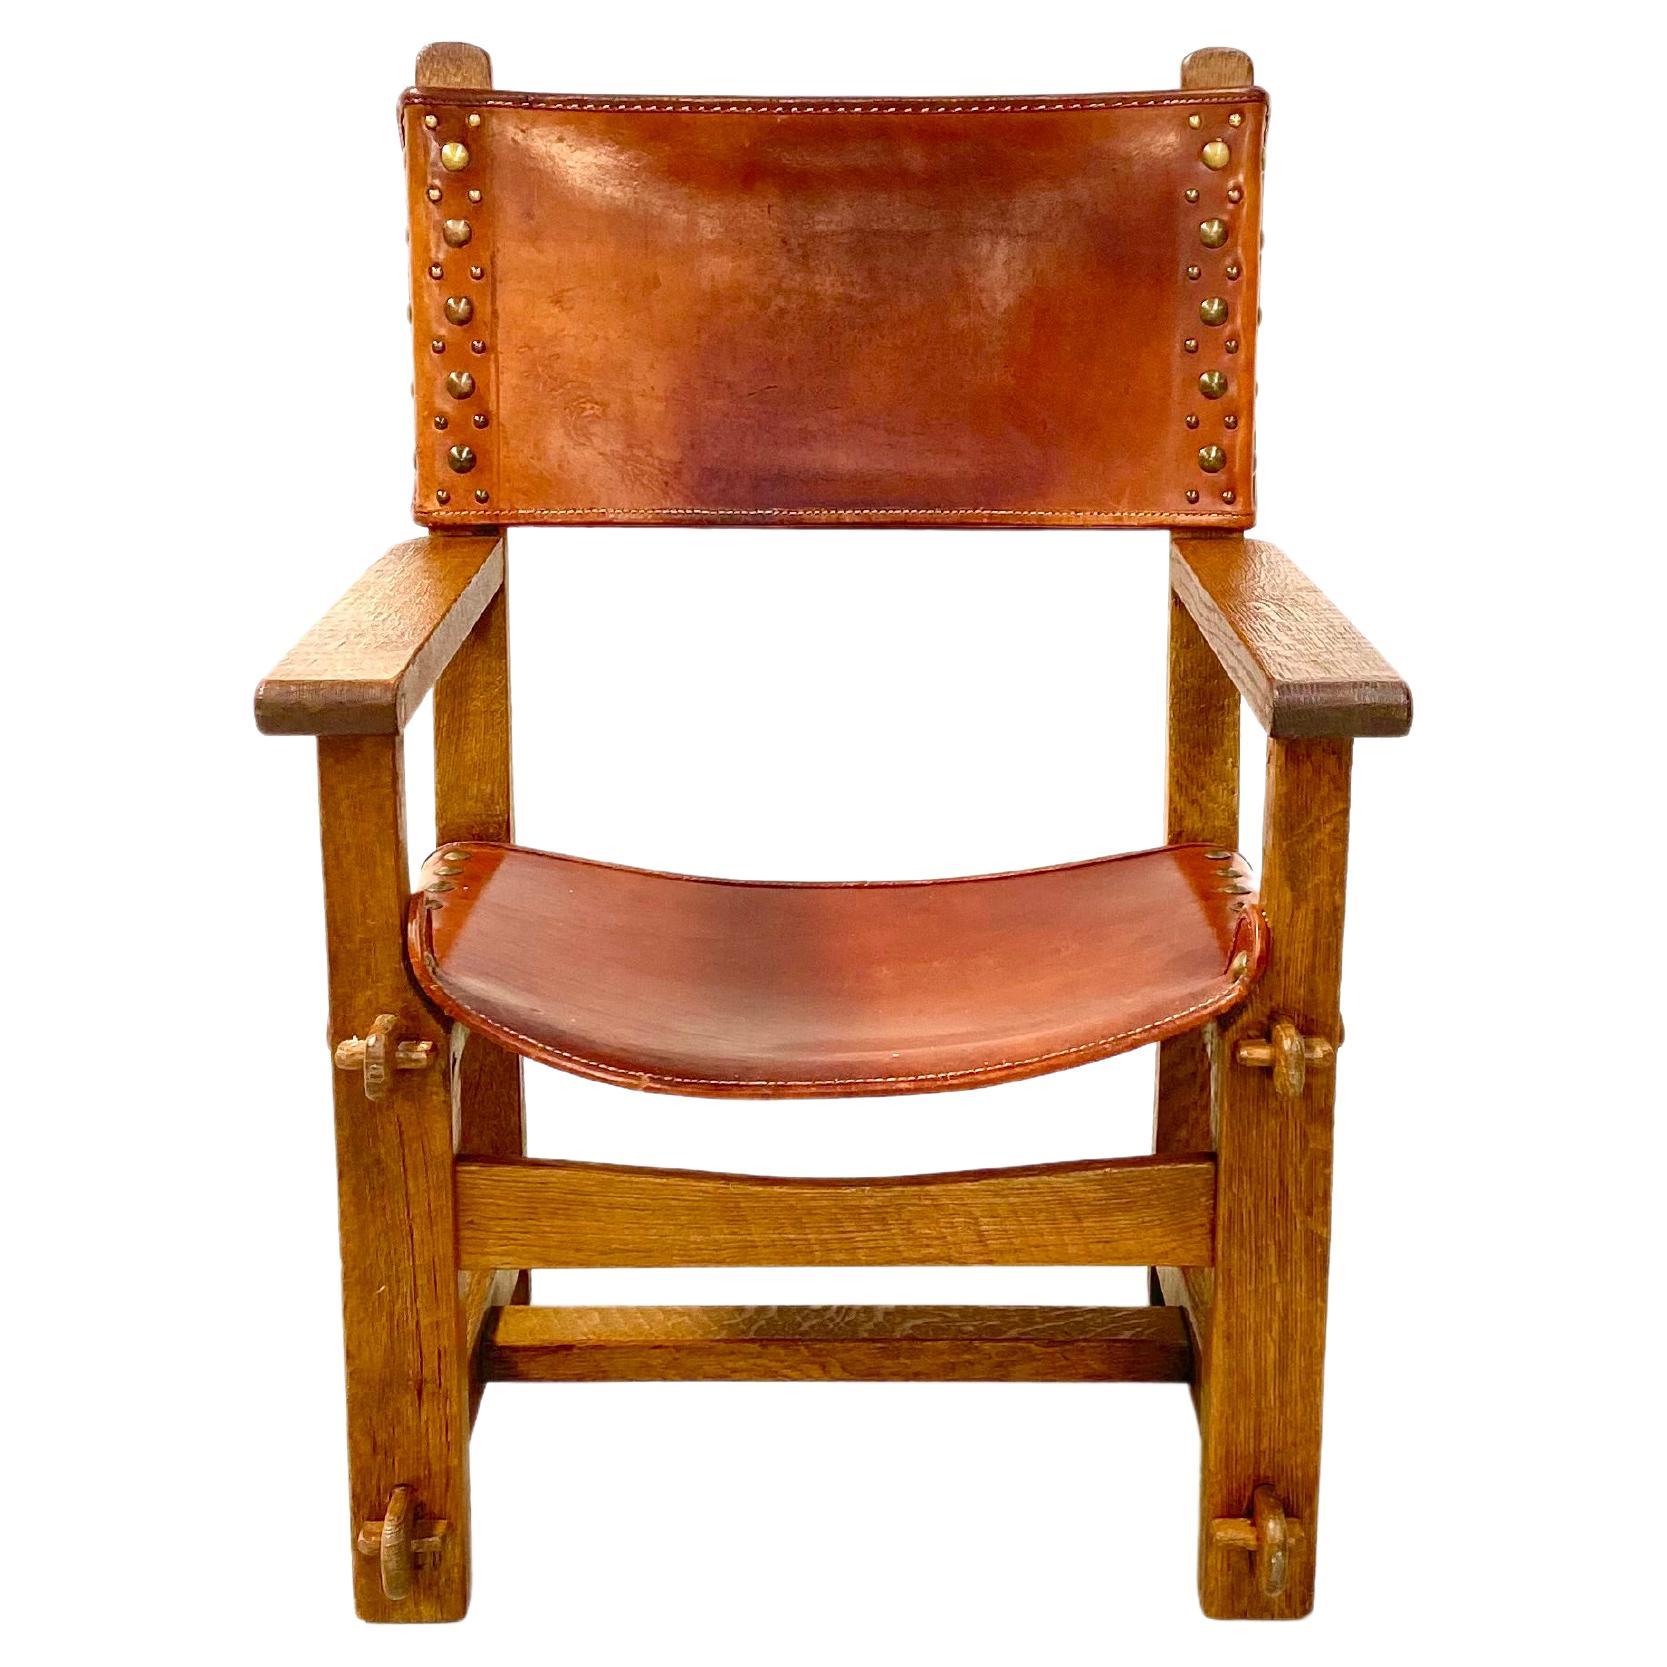 Antique Castle Chair in thick Cognac leather and oak wood. It was handmade in France in the late twenties. Handmade only from wood and leather. The patinated solid oak frame is handcrafted and the connections are made with wooden bobbins no nails or